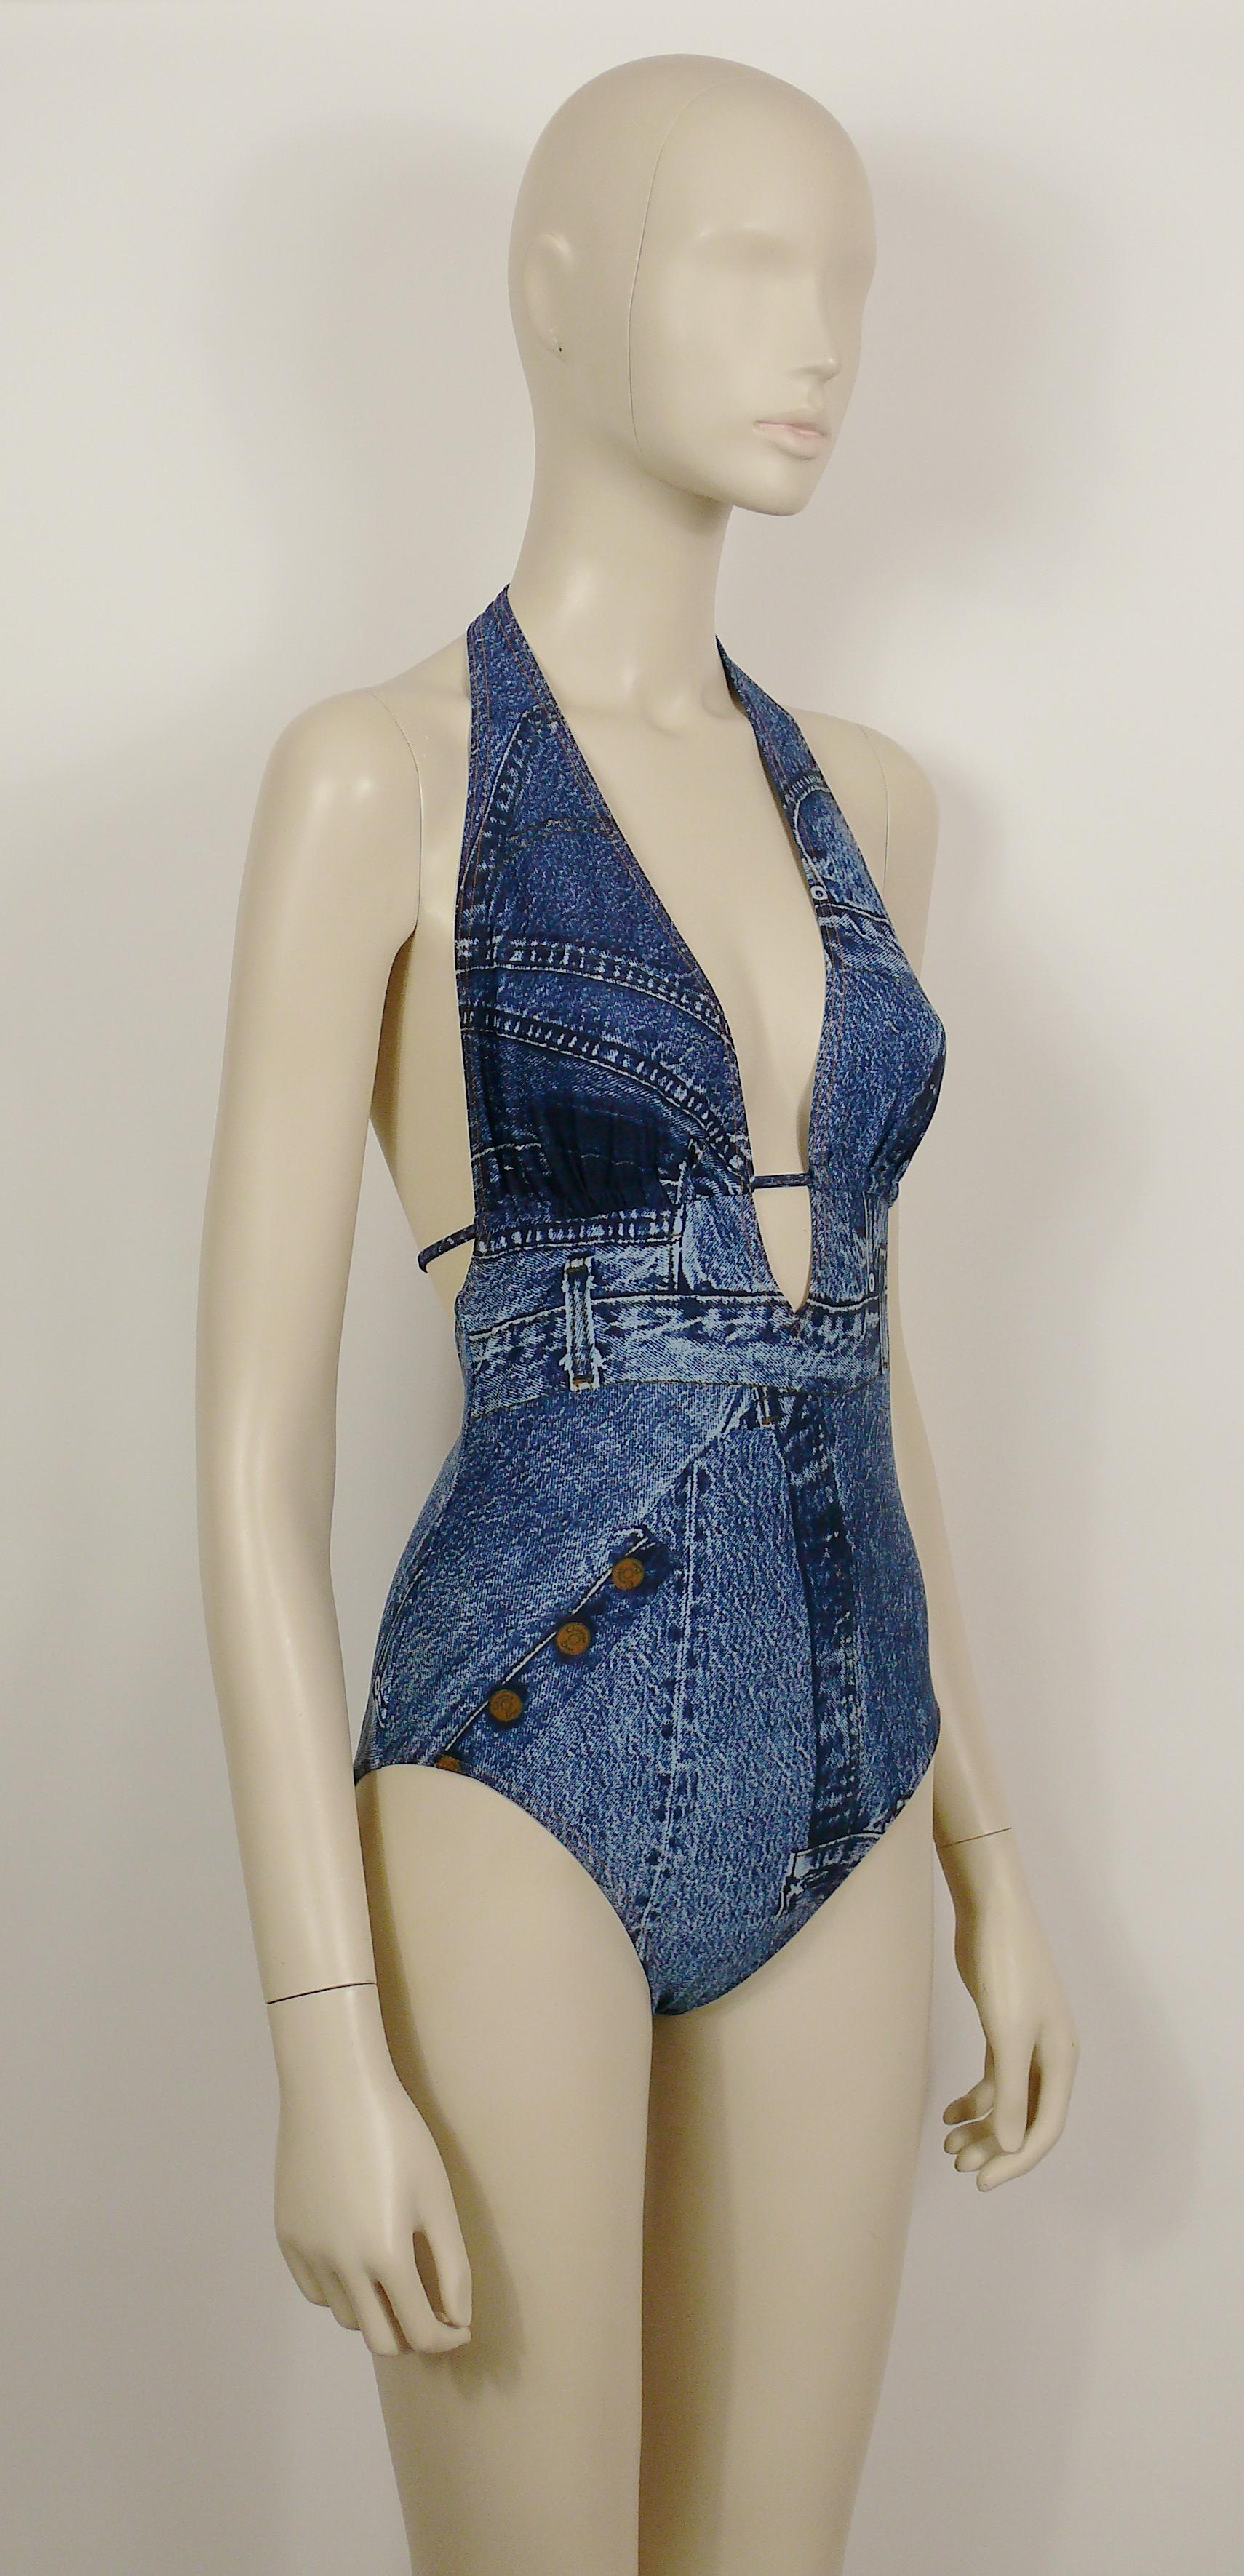 CHRISTIAN DIOR vintage one-piece halter swimsuit featuring a denim trompe l'oeil print.

Adjustable ties at back spaghetti straps.

Label reads CHRISTIAN DIOR.
Made in France.

Size tag reads : FR 42 / EUR 40 / INT 14.
Please refer to measurements.